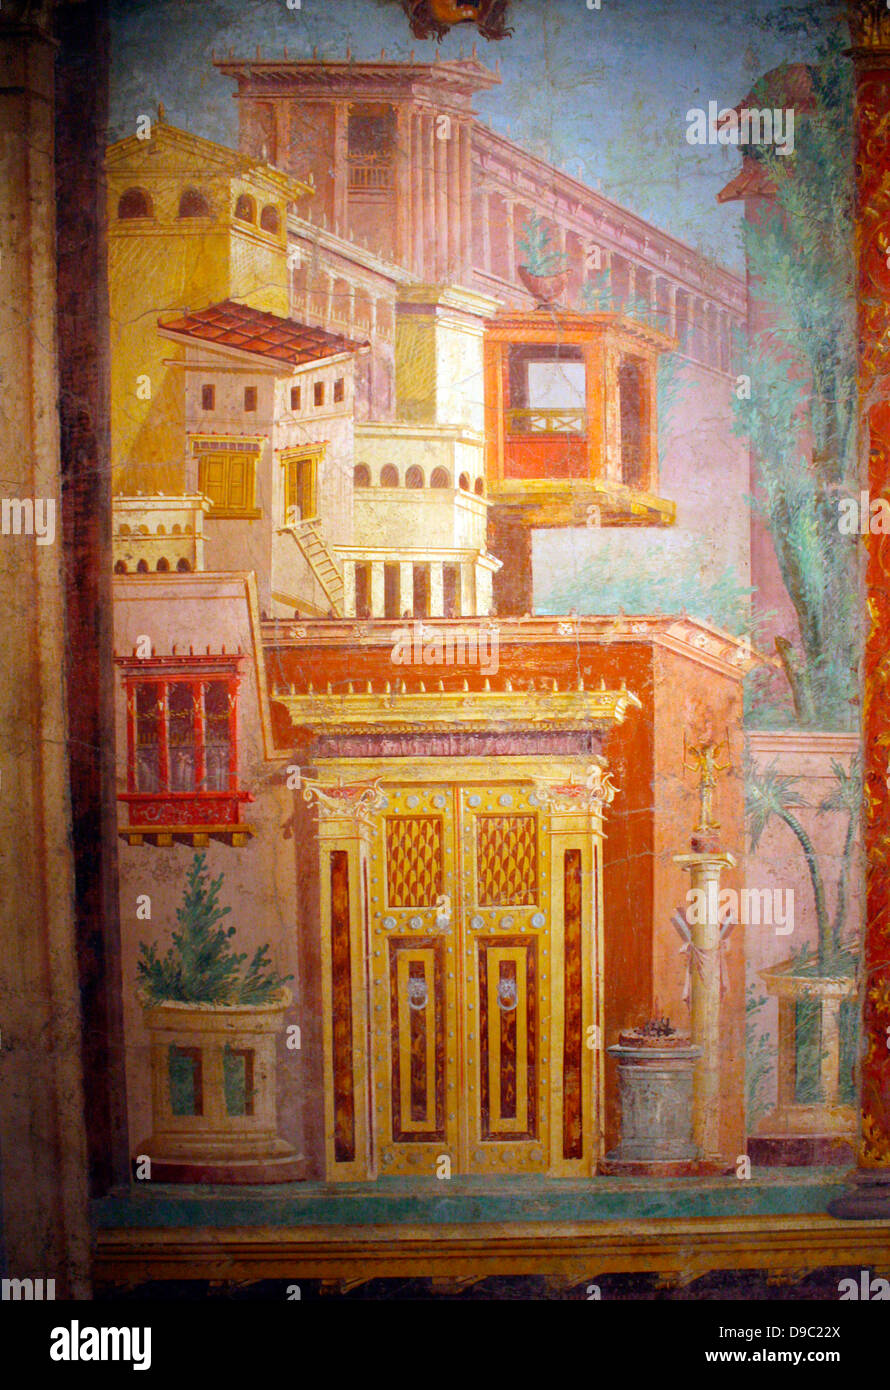 Wall Paintings from a Cubiculum Nocturnum (bedroom).  Roman, Late Republican, ca 50-40 BC. The wall paintings in this cubiculum, executed in the fresco technique, are among the most complete and important to have survived from antiquity. Stock Photo